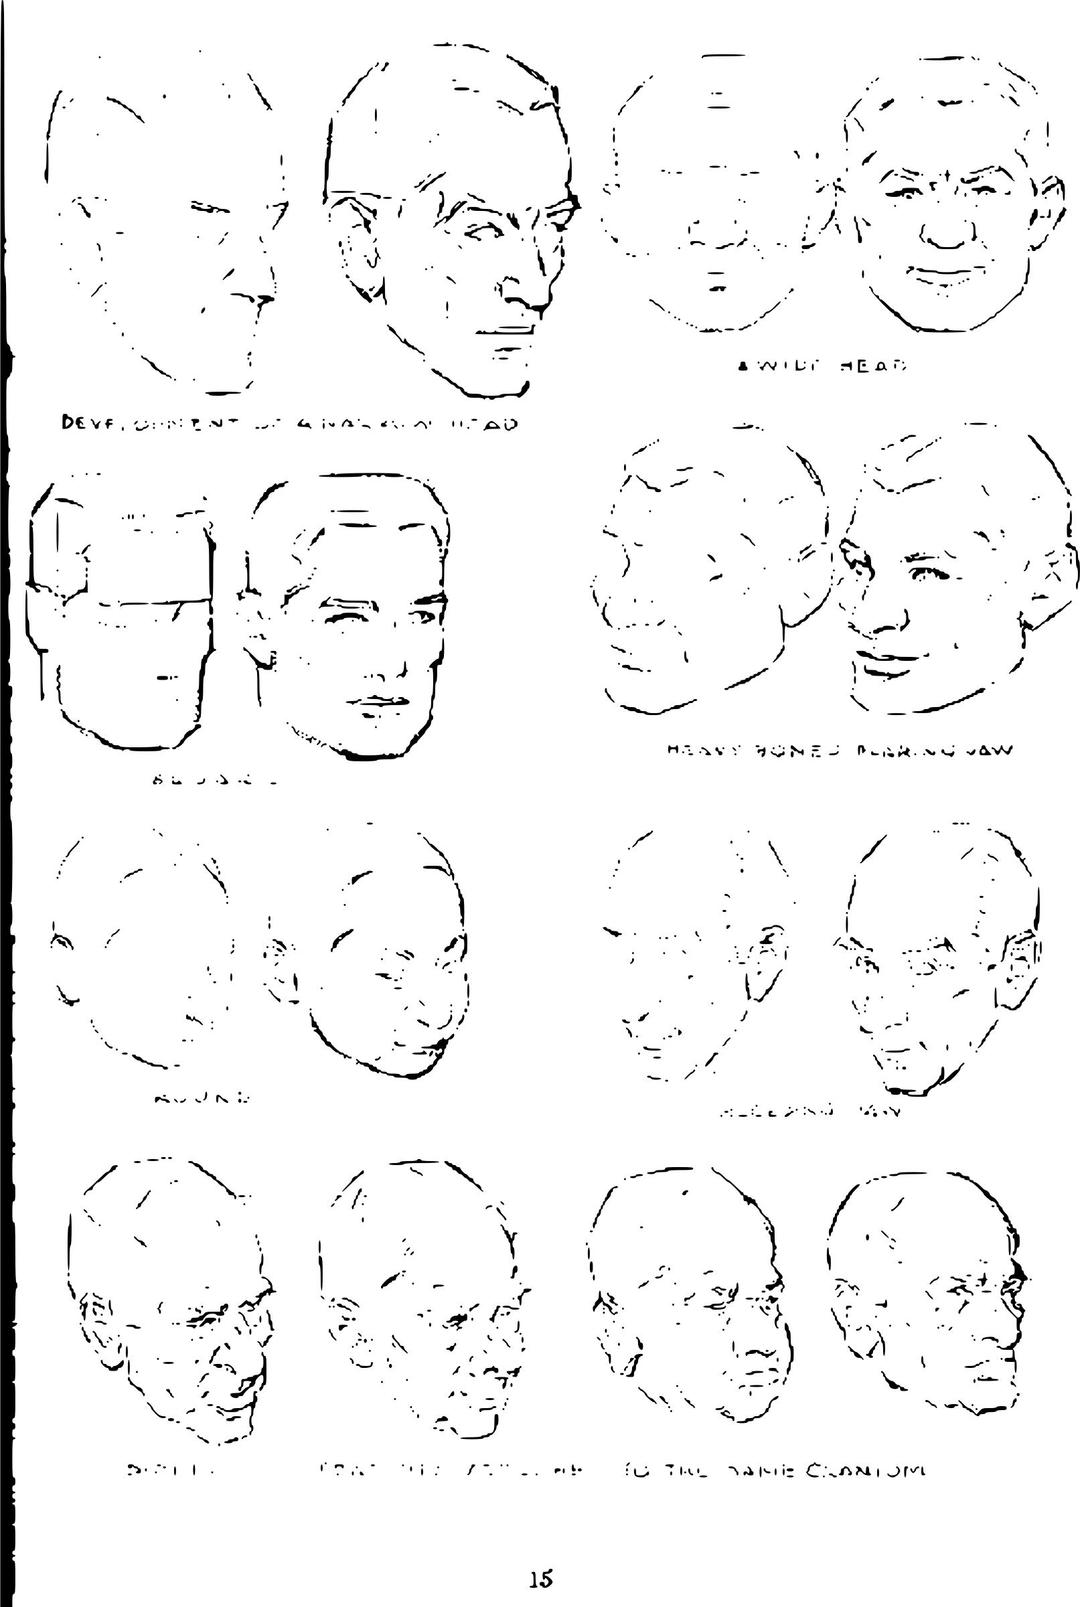 Andrew Loomis Drawing the Head and Hands (potrace) 11 png transparent